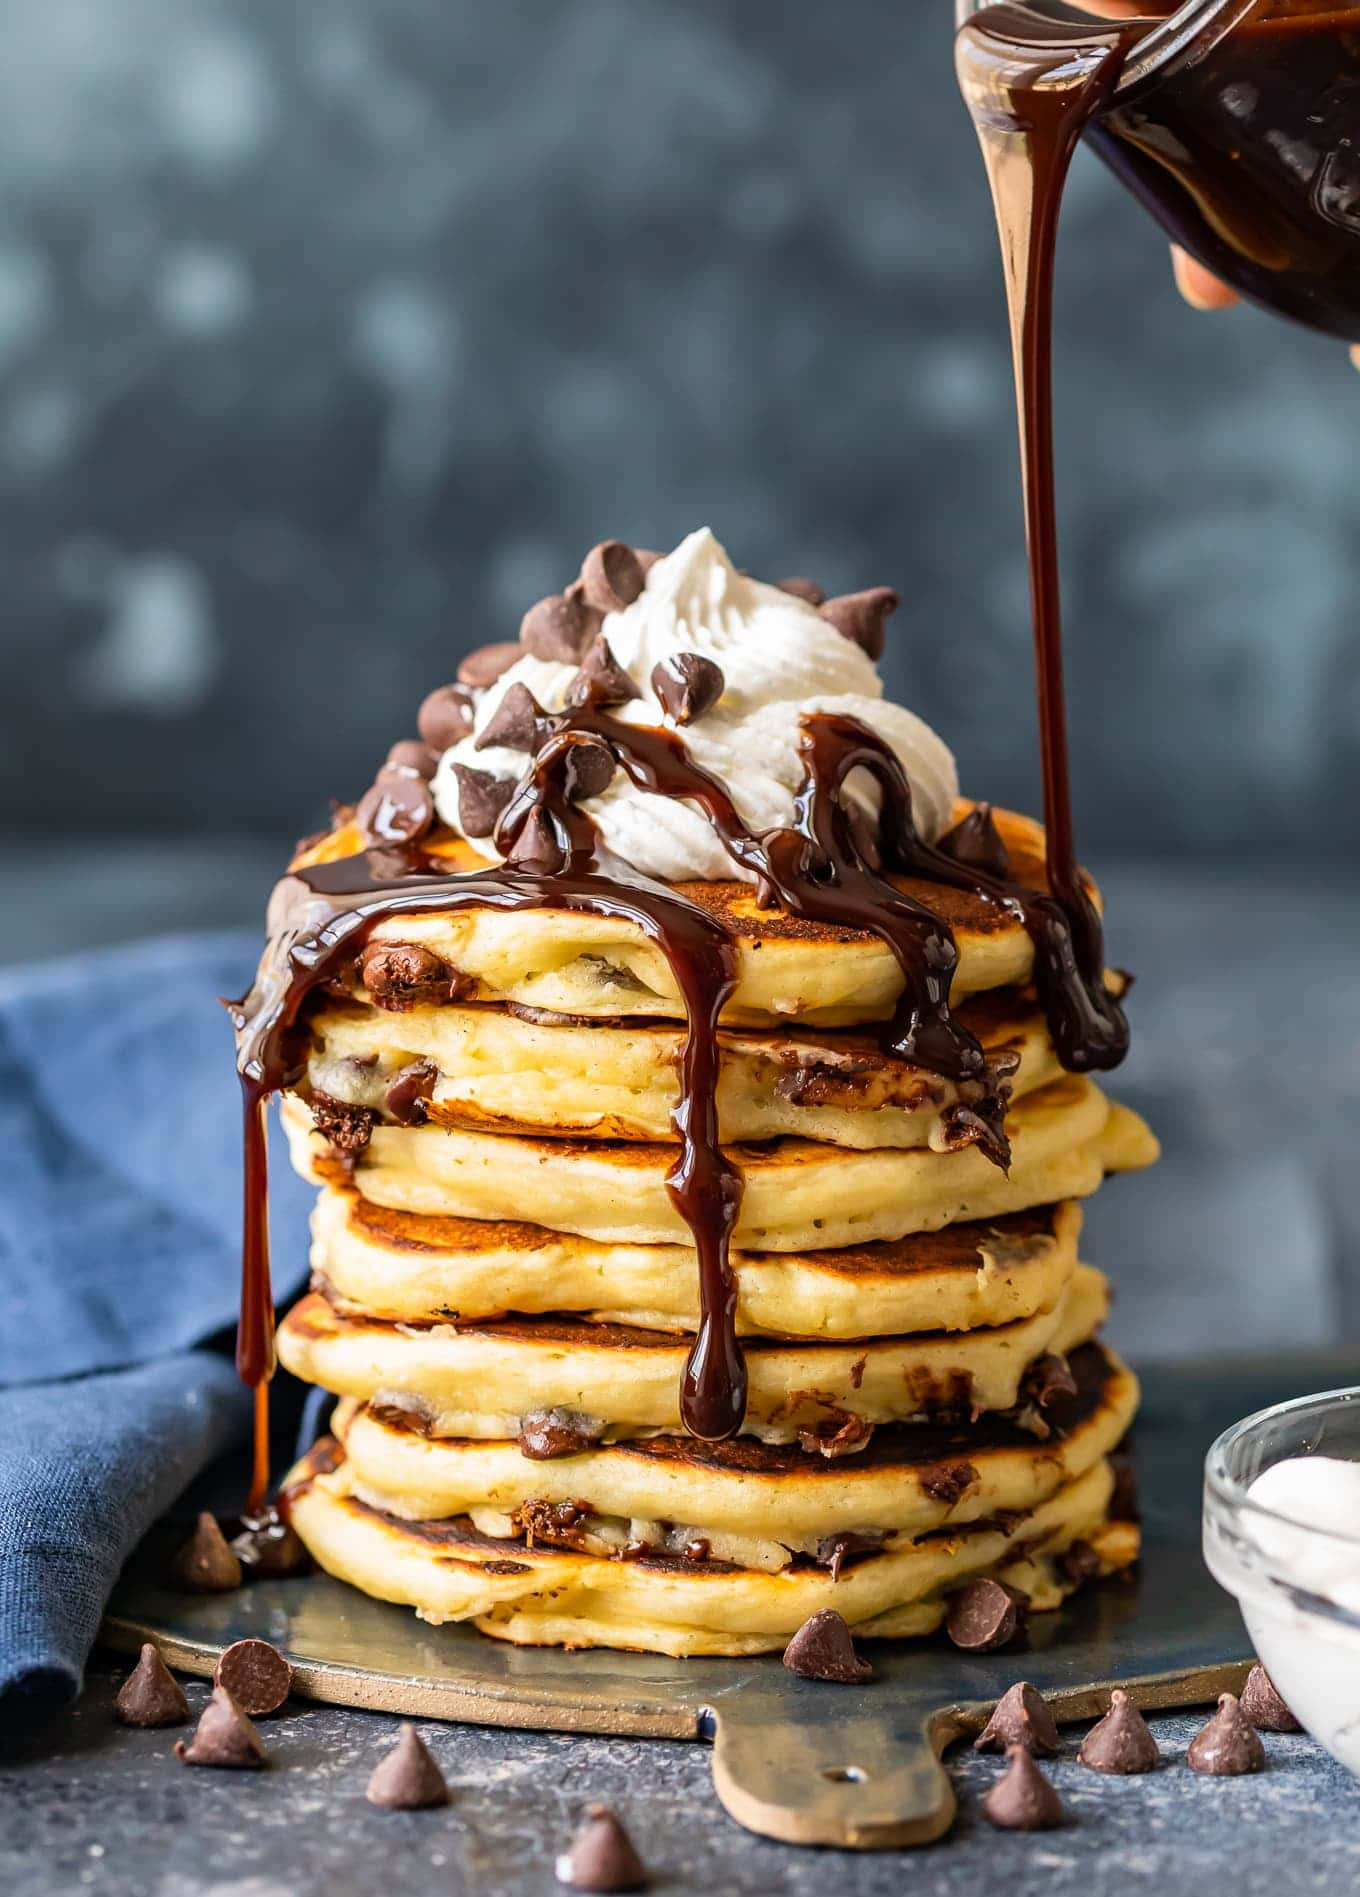 Pancakes With Chocolate Syrup
 Easy Chocolate Syrup Chocolate Sauce for Pancakes The